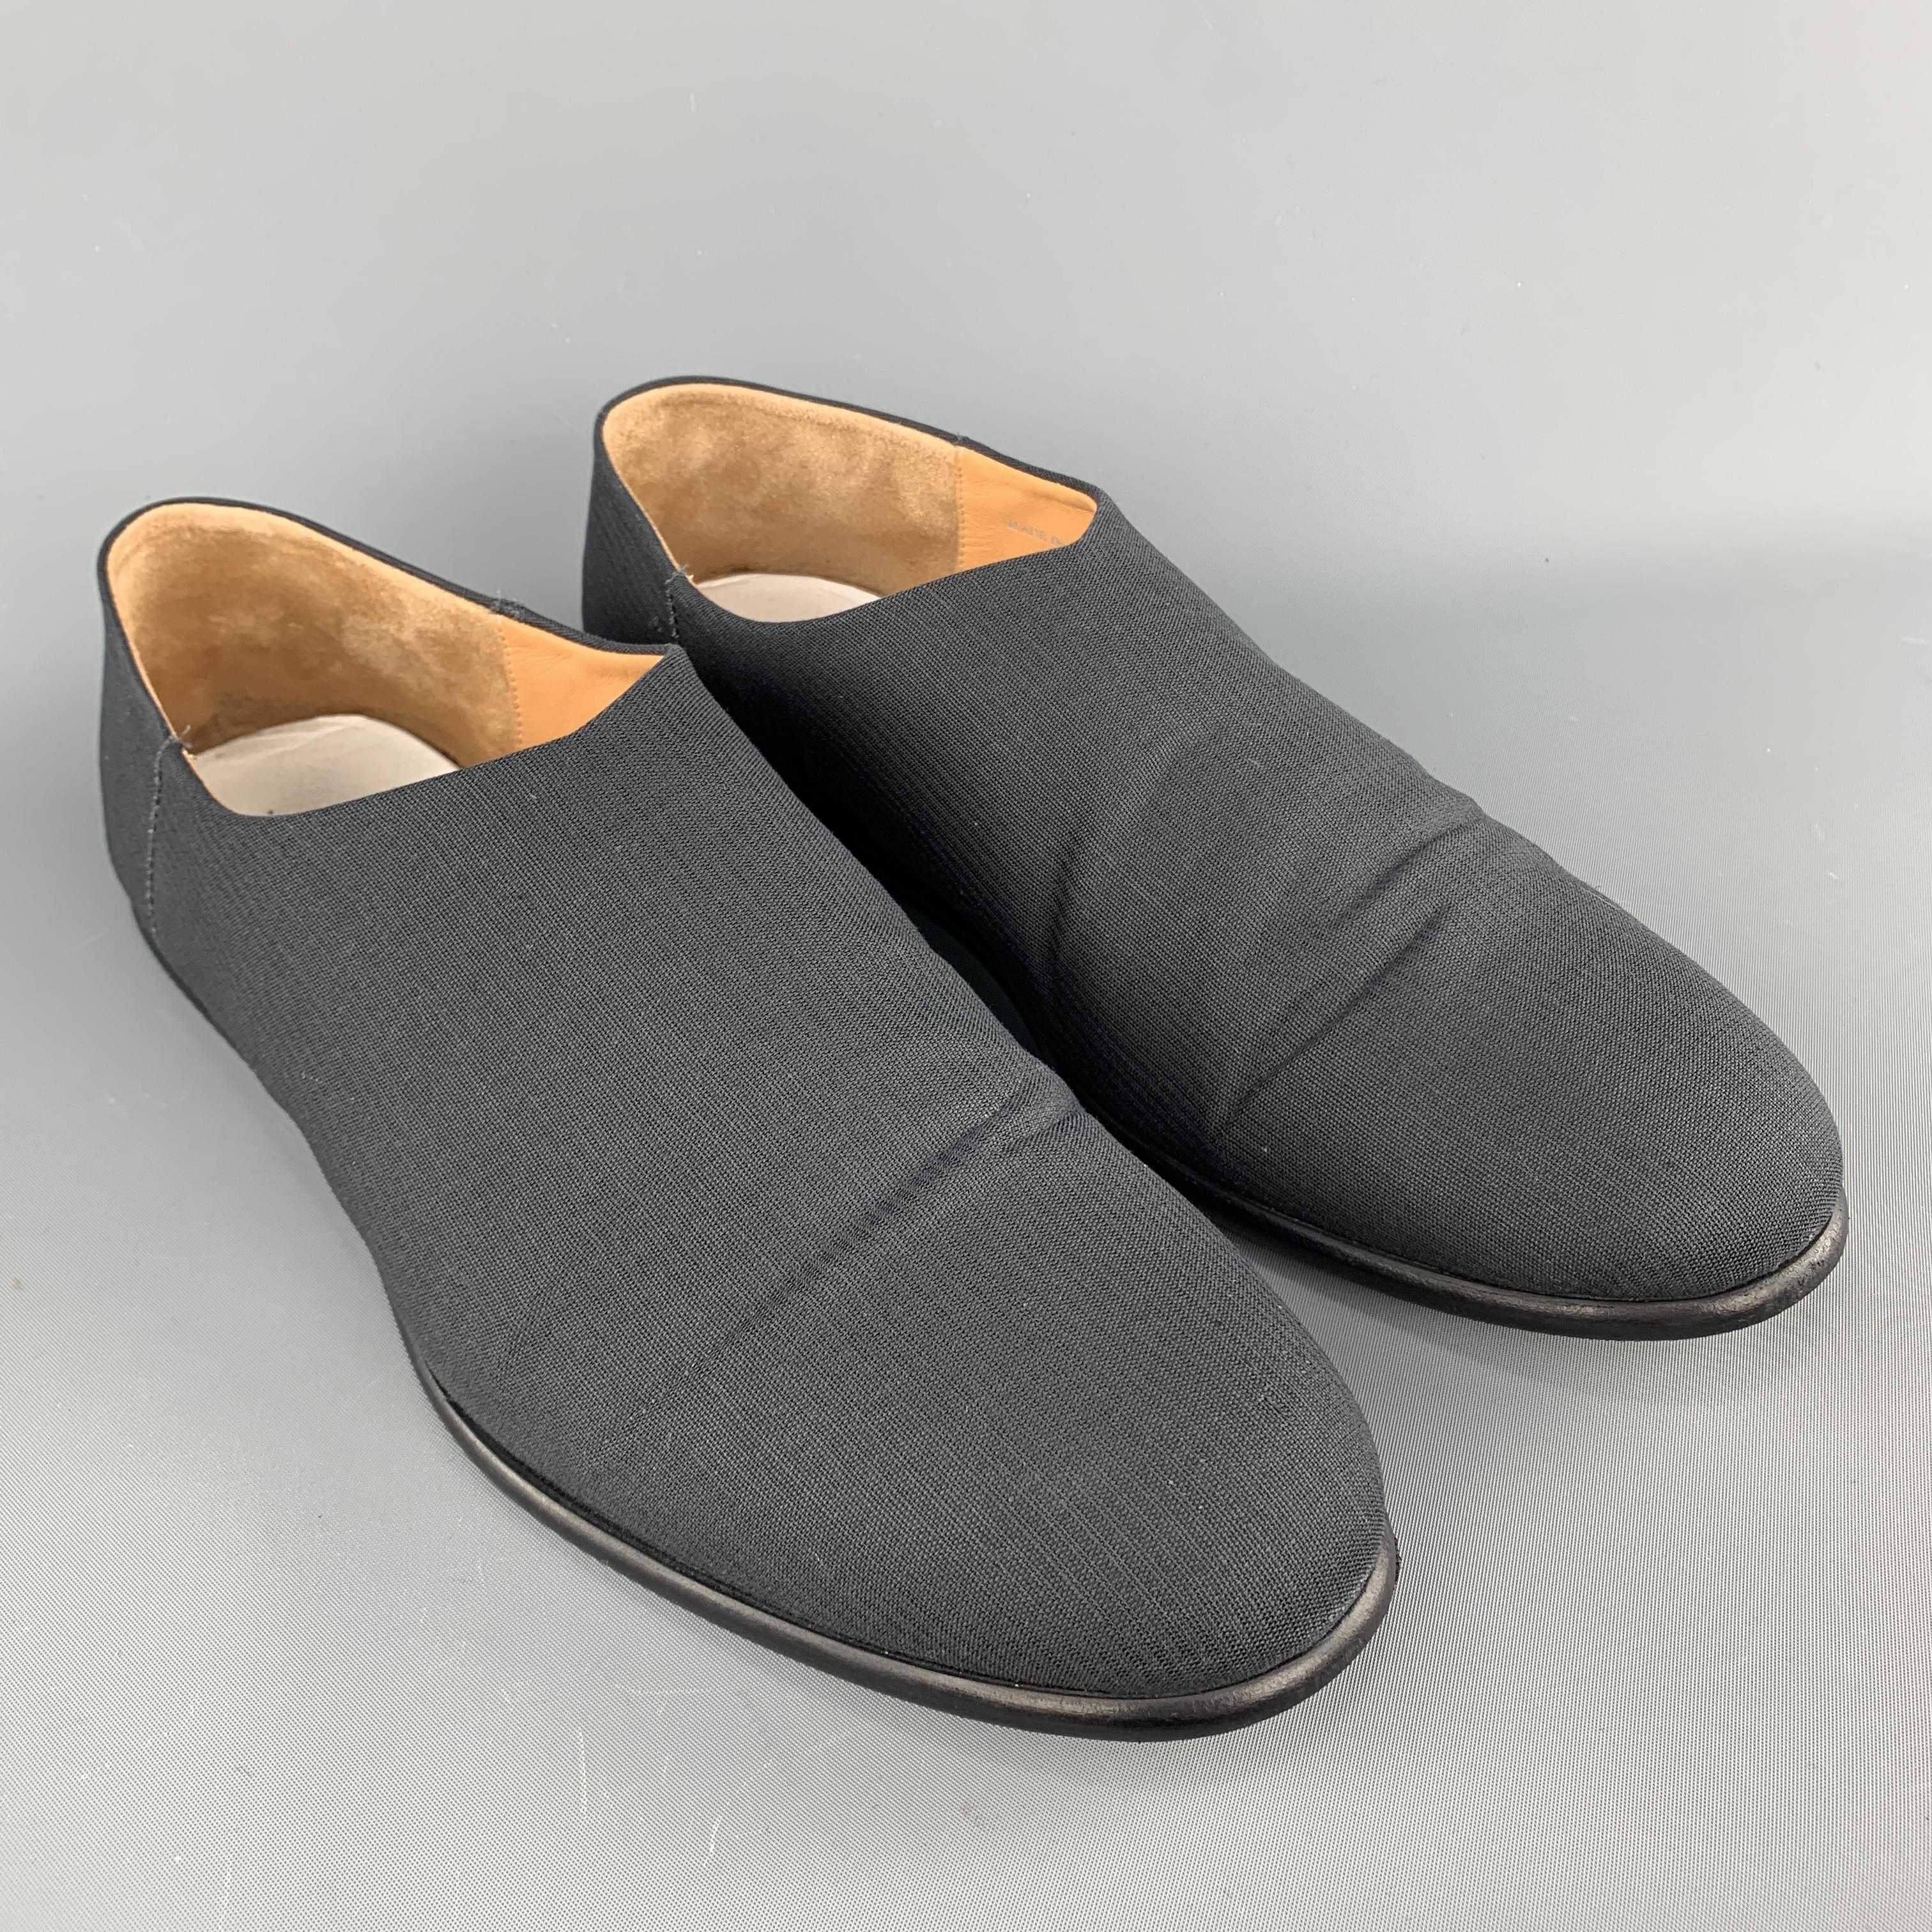 Maison Martin Margiela moccasin style loafers come in navy stripe textured canvas with a black leather sole and white stitch back. Made in Italy.
 

Excellent Pre-Owned Condition.
Marked: IT 43

Outsole: 12 x 4.5in.